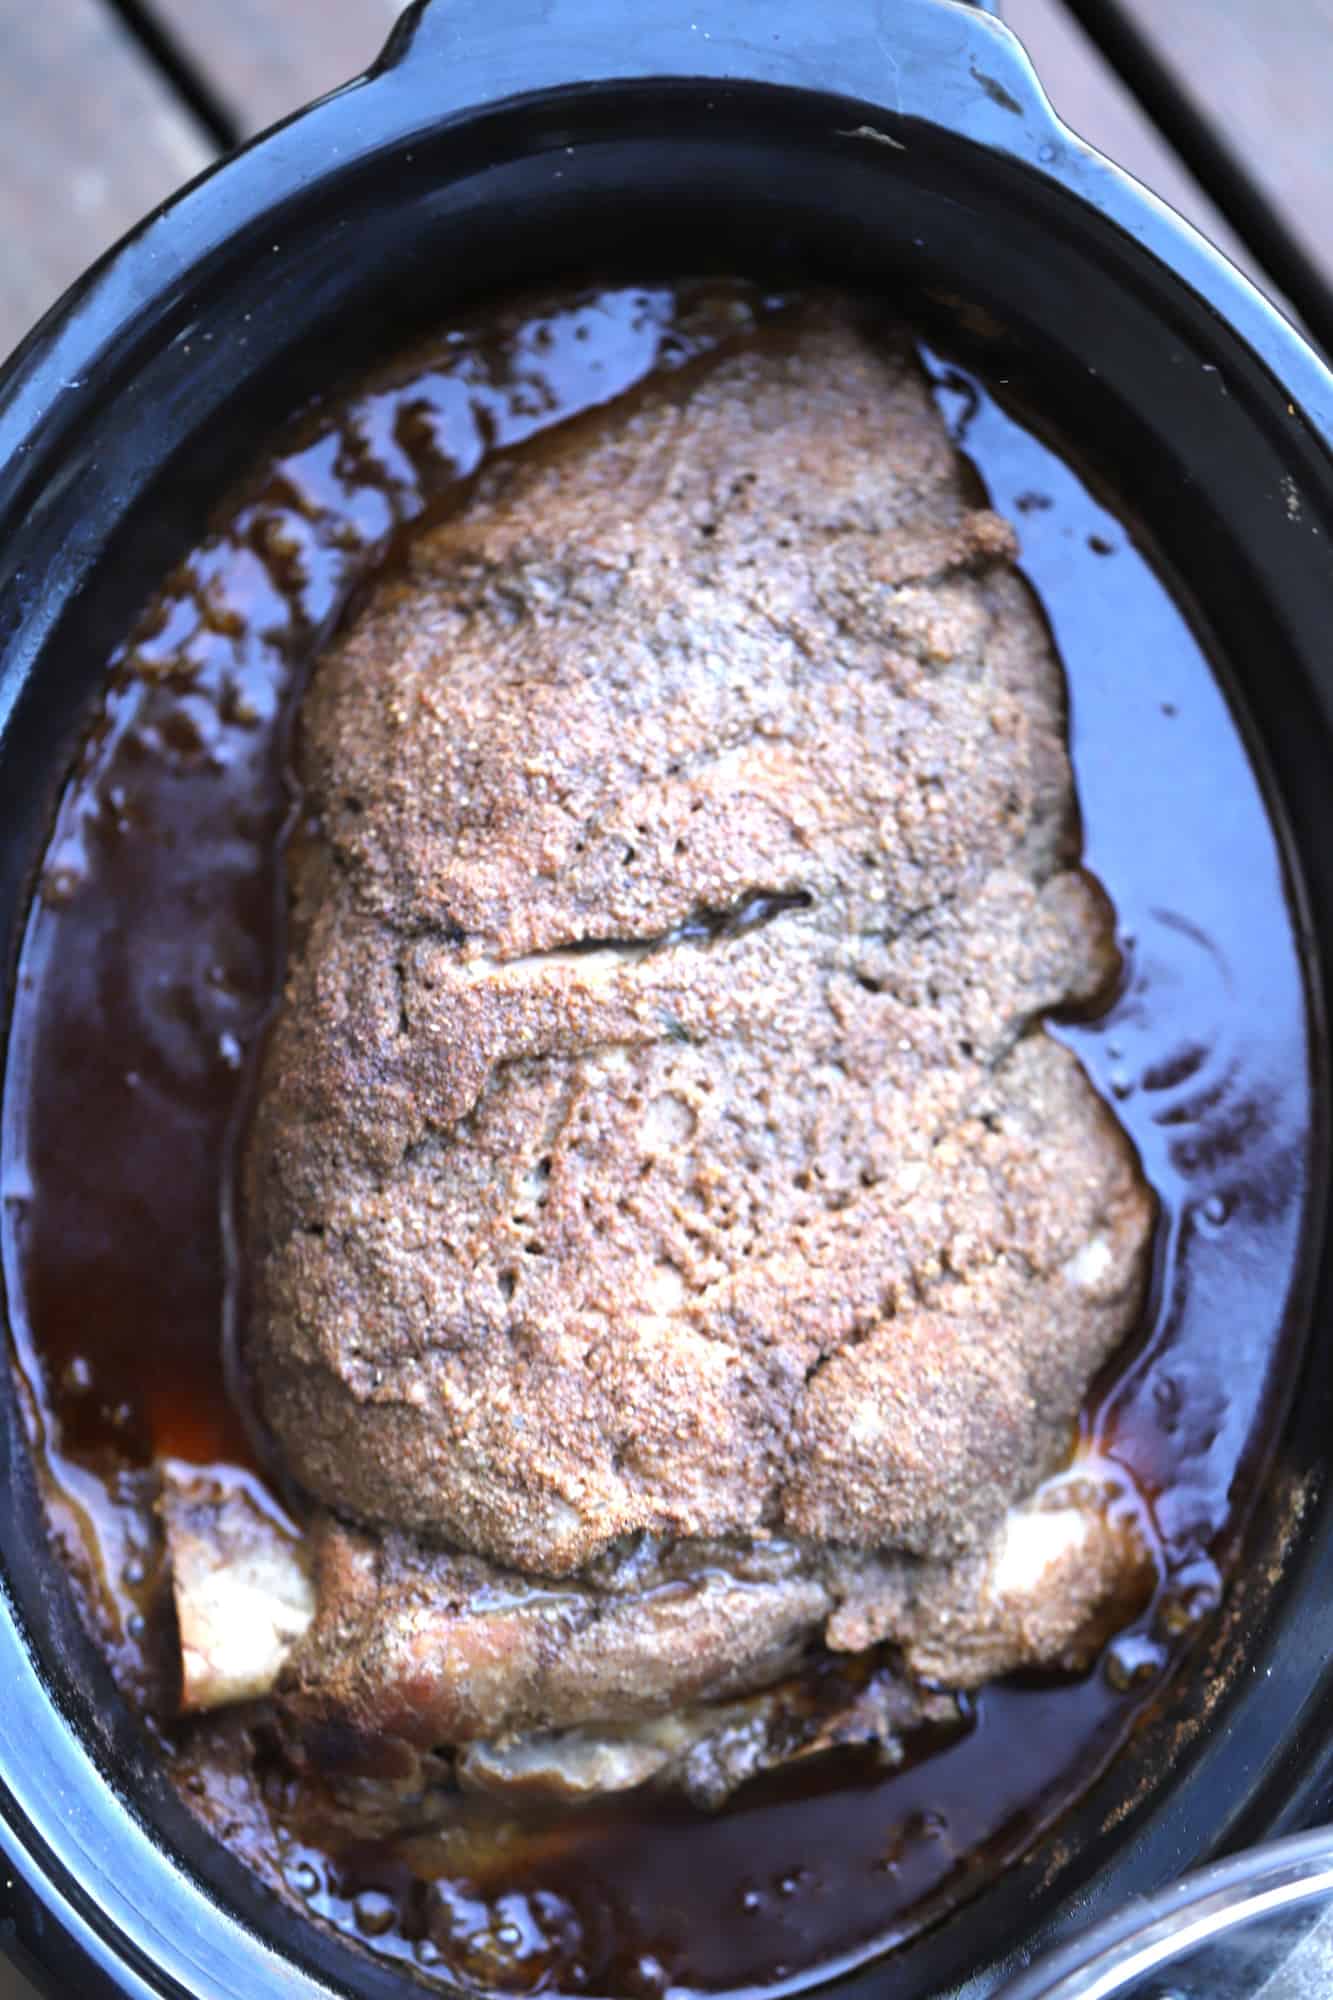 Bone-in pork shoulder in a slow cooker ready to shred into this pulled pork recipe.